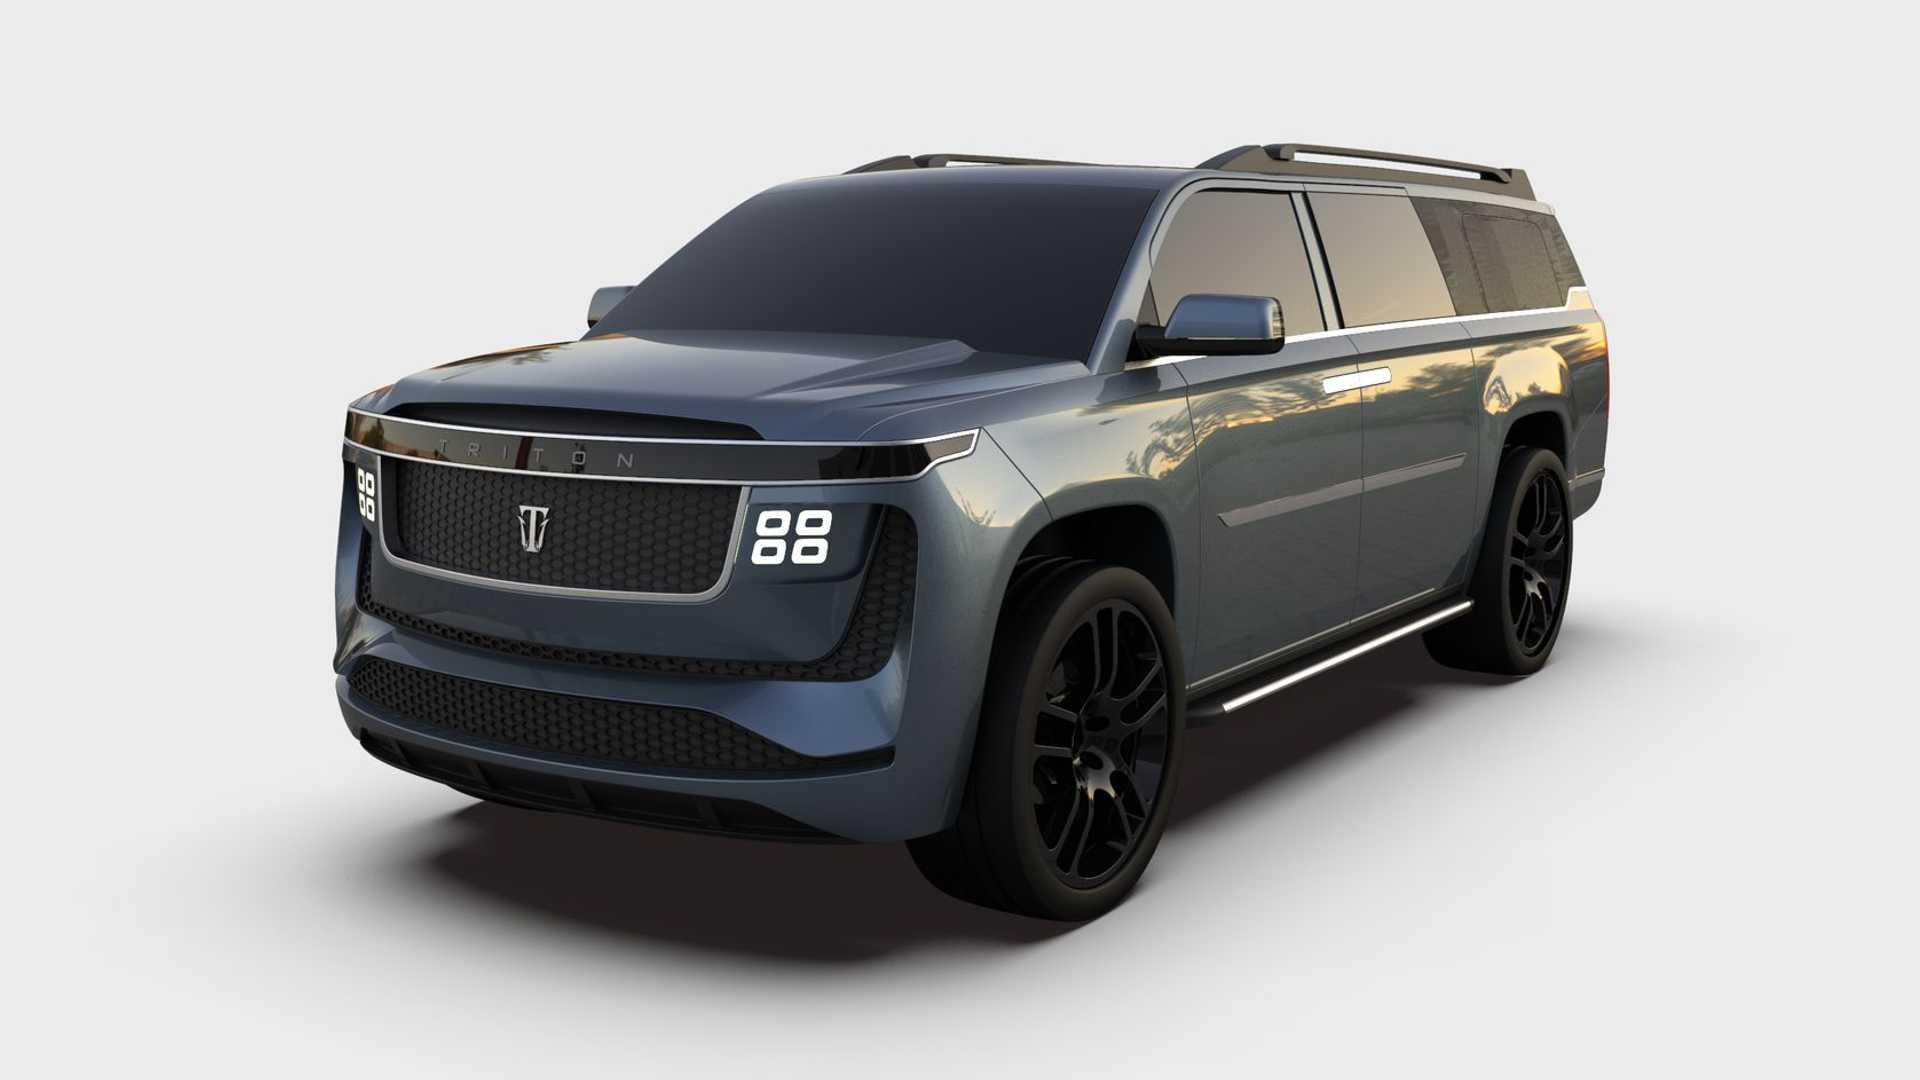 Triton Model H, the Electric SUV With 700Mile Range That Tells a Very